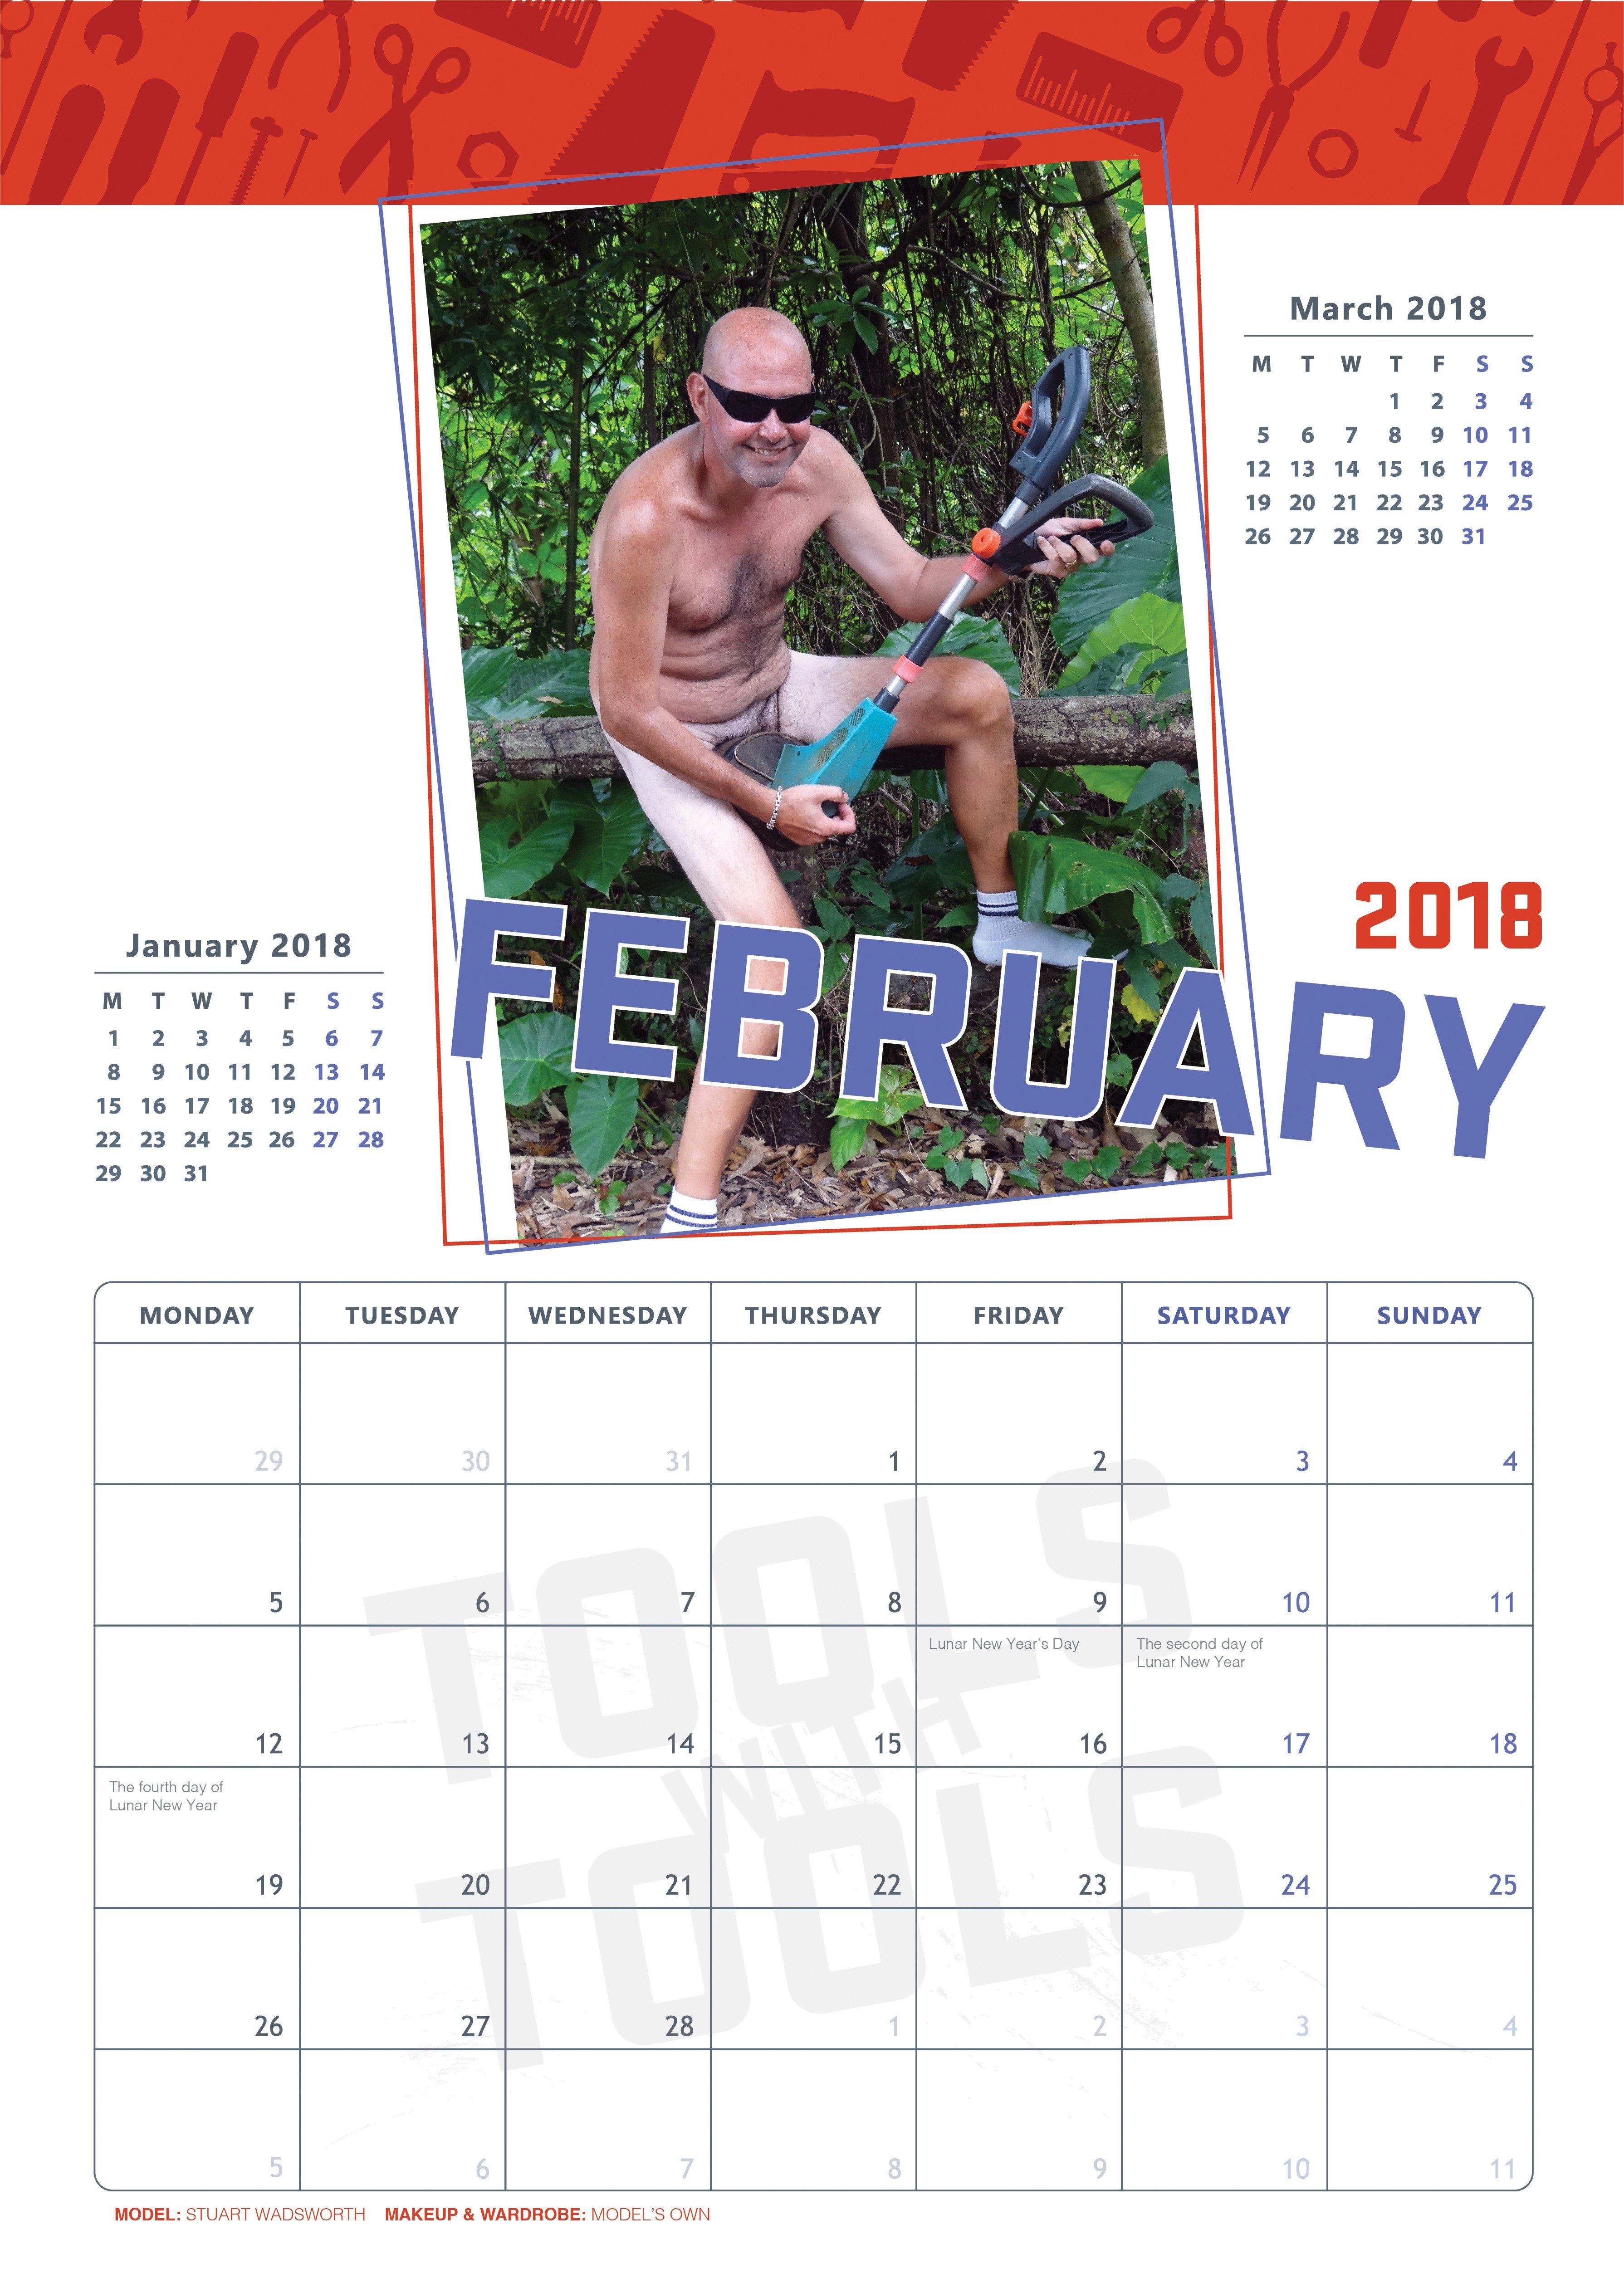 Stuart Wadsworth poses with his strimmer as Mr February for the ‘Tools with Tools’ calendar.